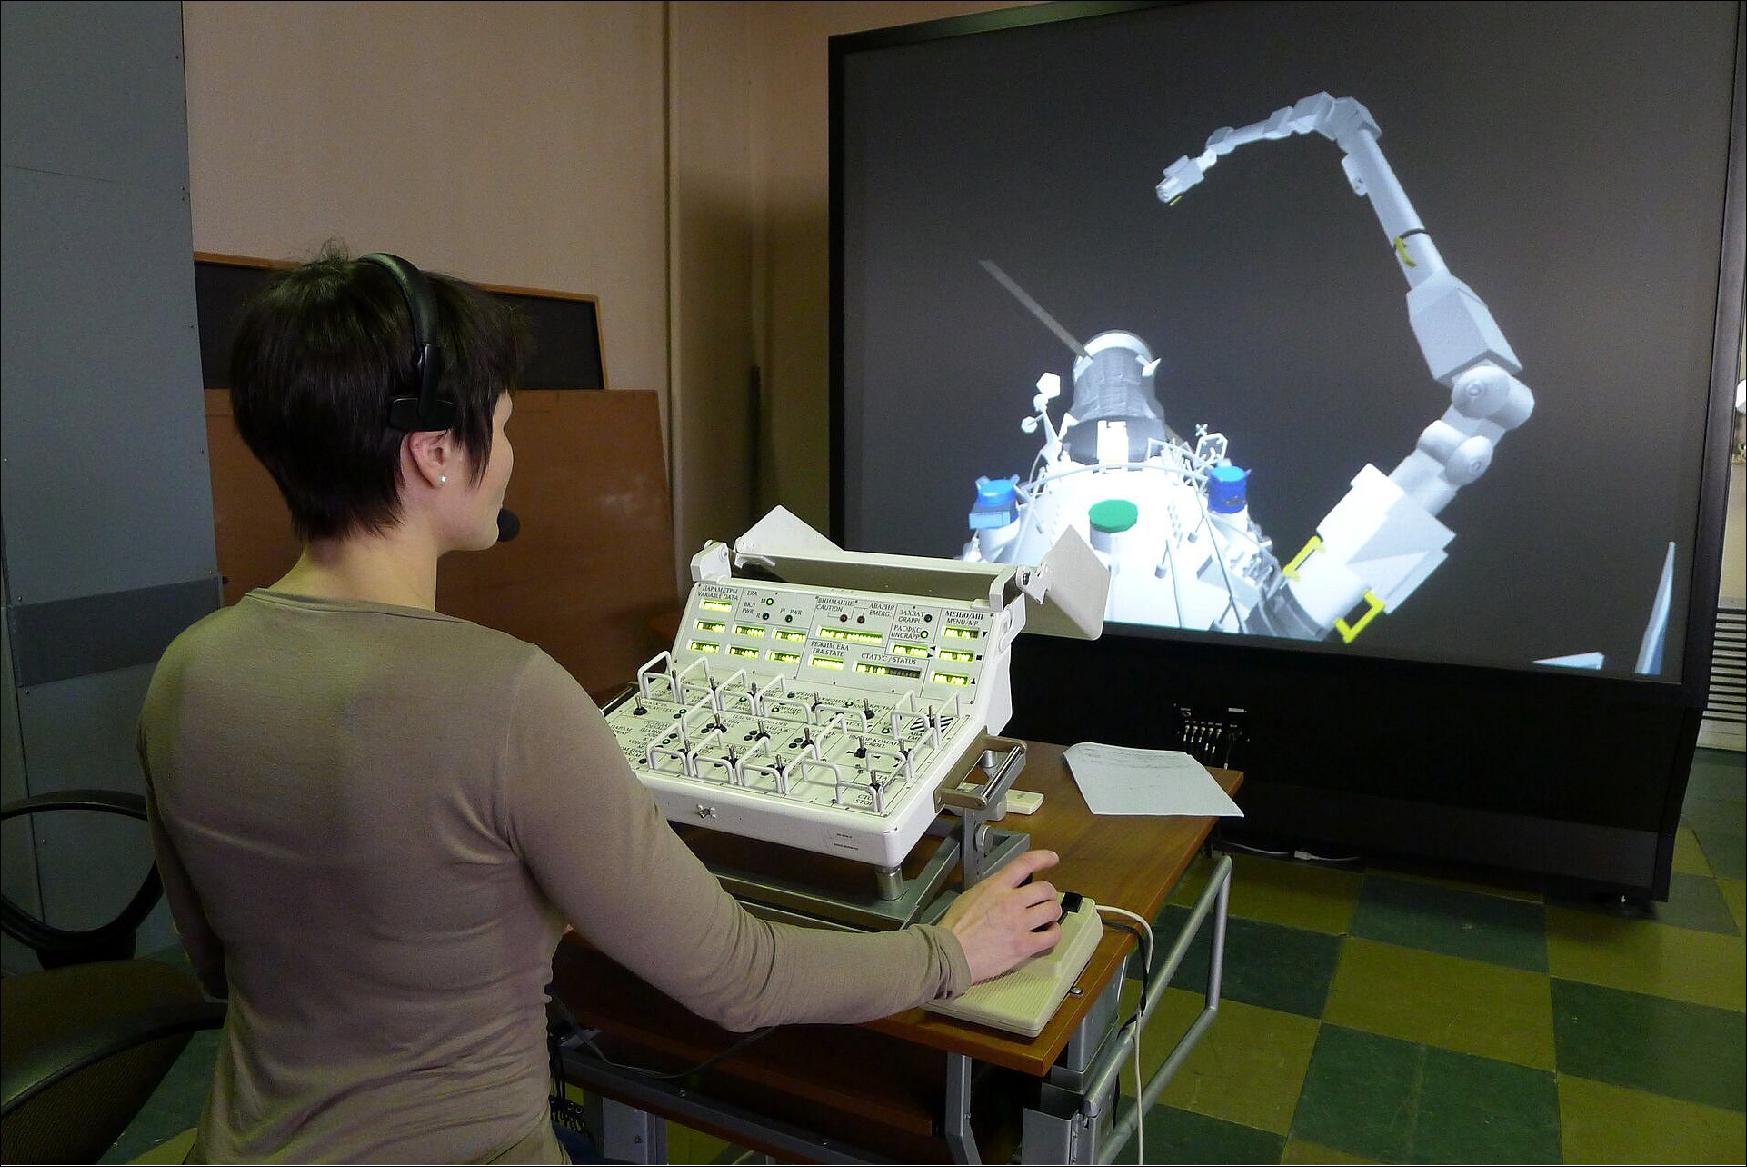 Figure 14: ESA astronaut Samantha Cristoforetti trains with the European Robotic Arm (ERA) simulator at the Gagarin Cosmonaut Training Center (GCTC) in Moscow, Russia. It will take five spacewalks to get the robotic arm fit for space operations. ESA astronauts Matthias Maurer and Samantha Cristoforetti will support the installation both from inside and outside the Station by taking part in a few spacewalks. ERA’s first tasks in orbit are to set up the airlock and install a large radiator for the Multipurpose Laboratory Module, also called ‘Nauka’ (image credit: GCTC)